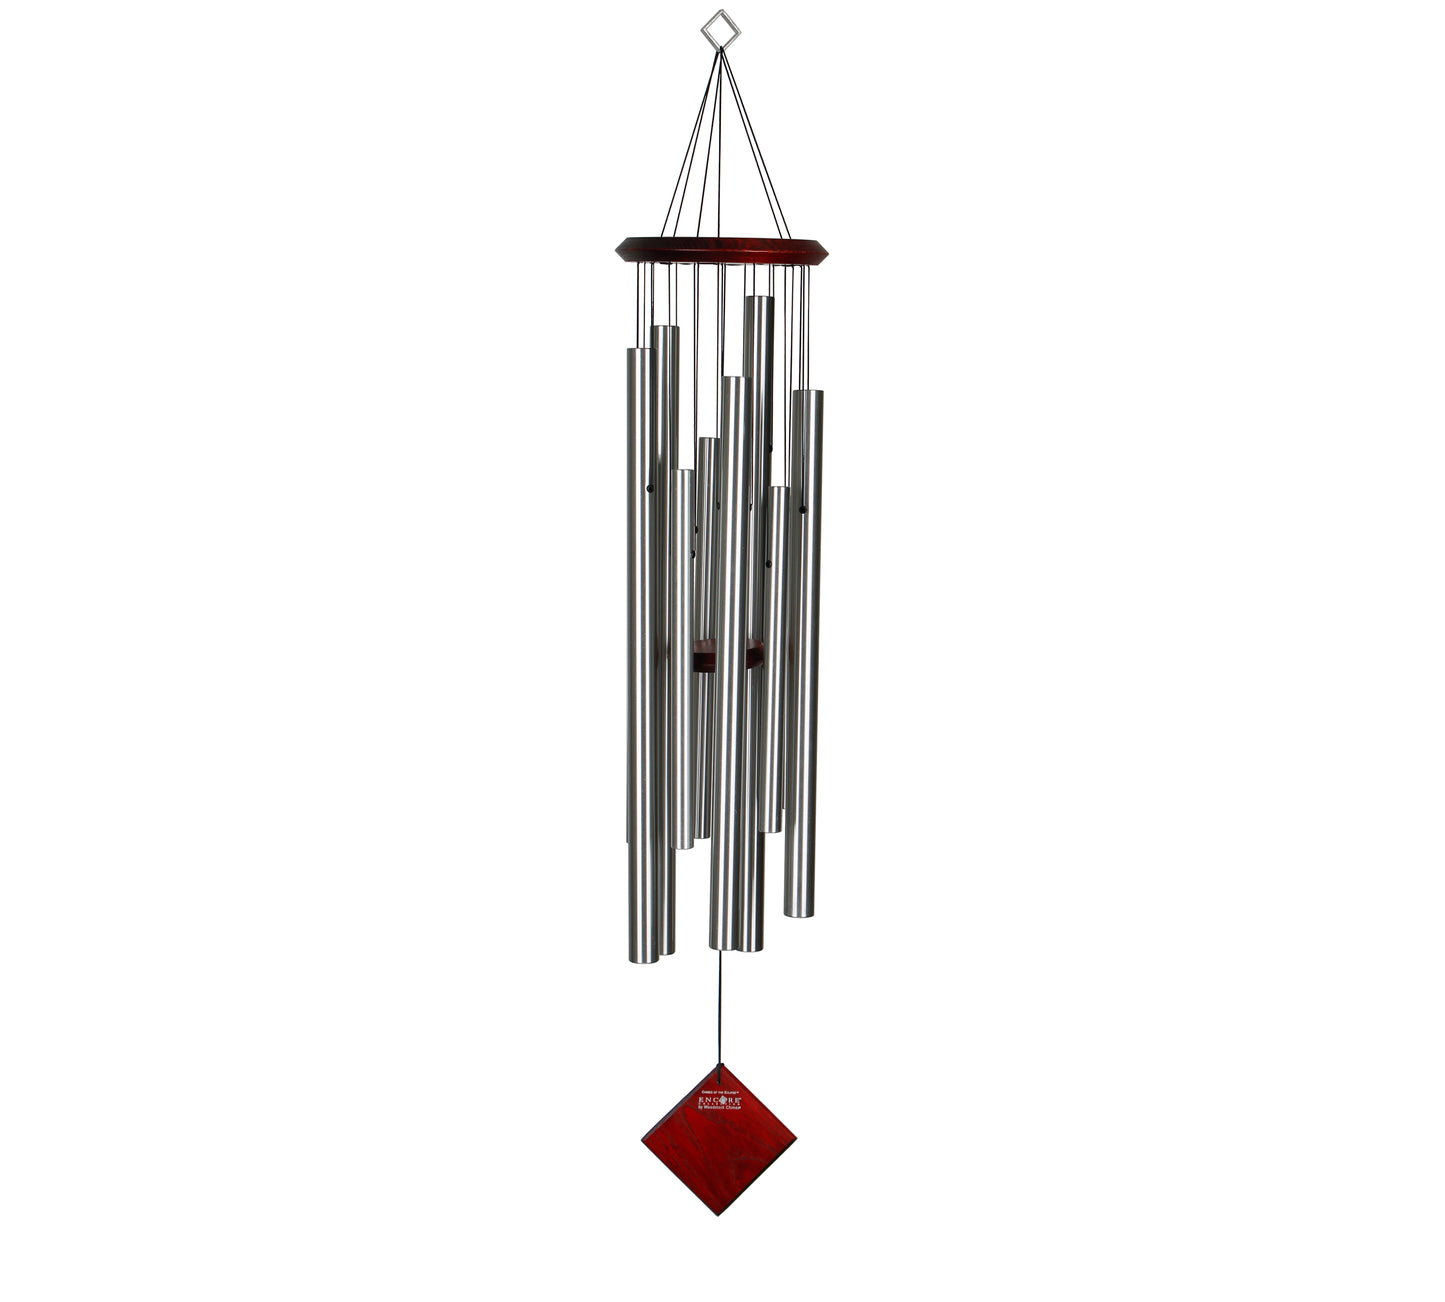 Encore Chimes of the Eclipse - Silver